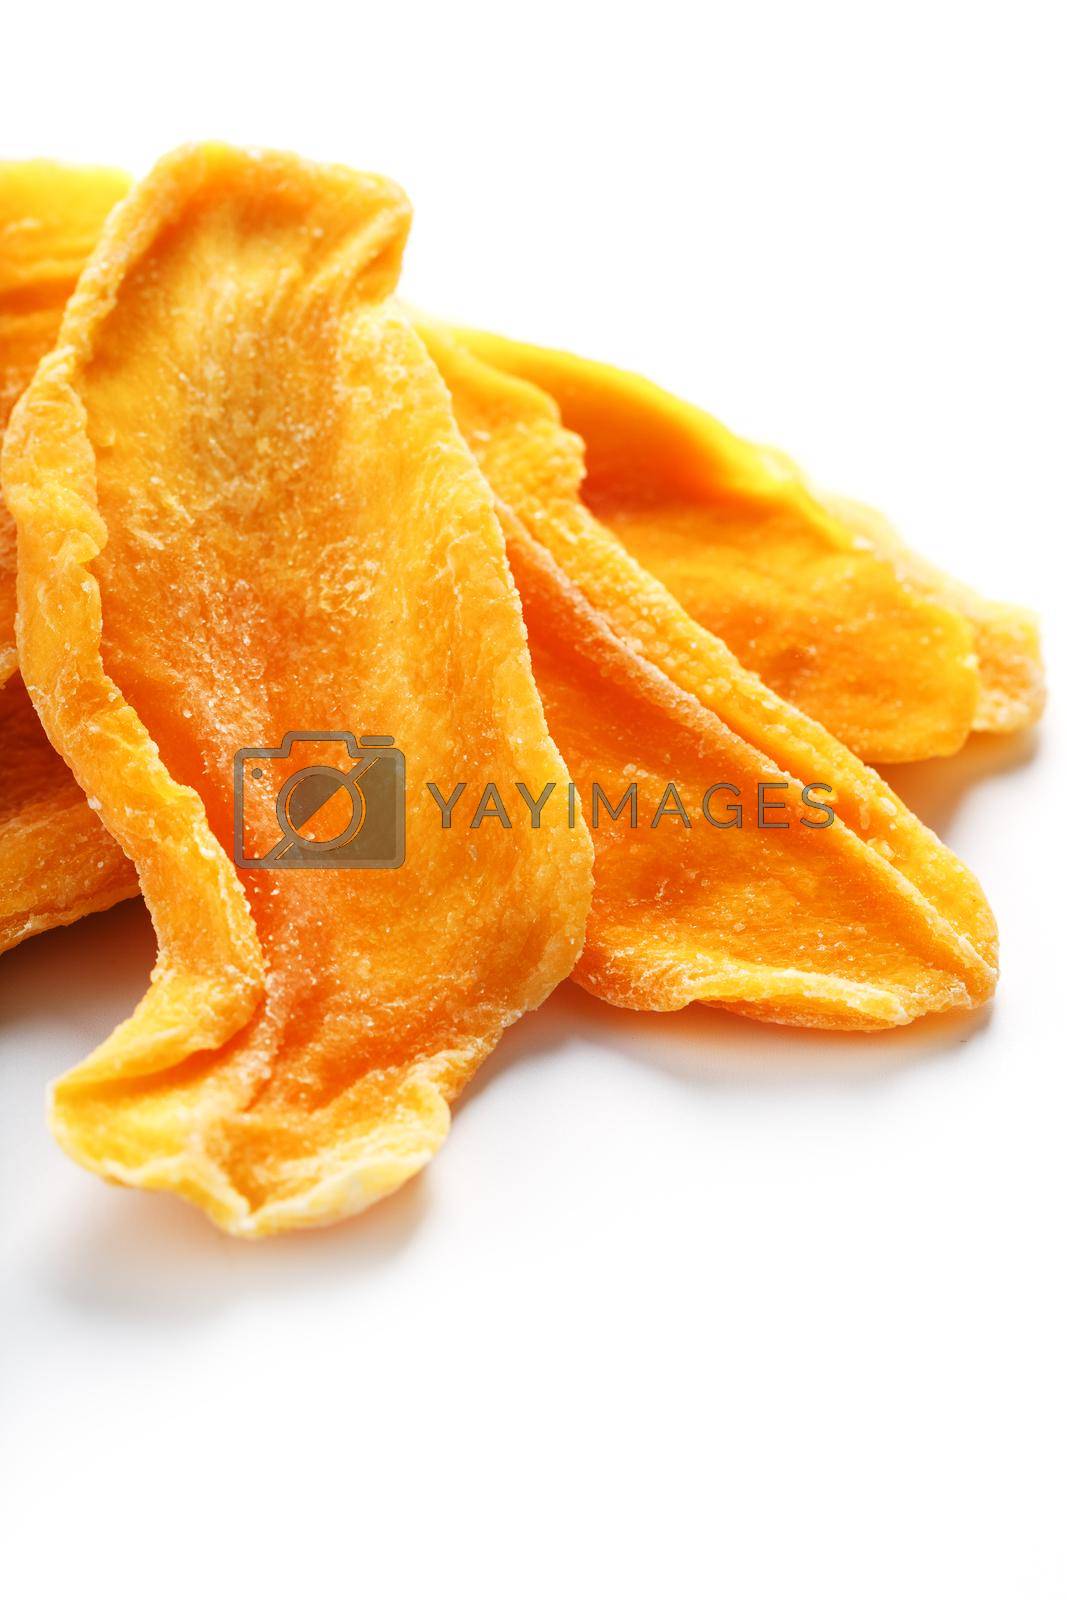 Royalty free image of Dried sweet mango fruit slices as textural orange by AlexGrec